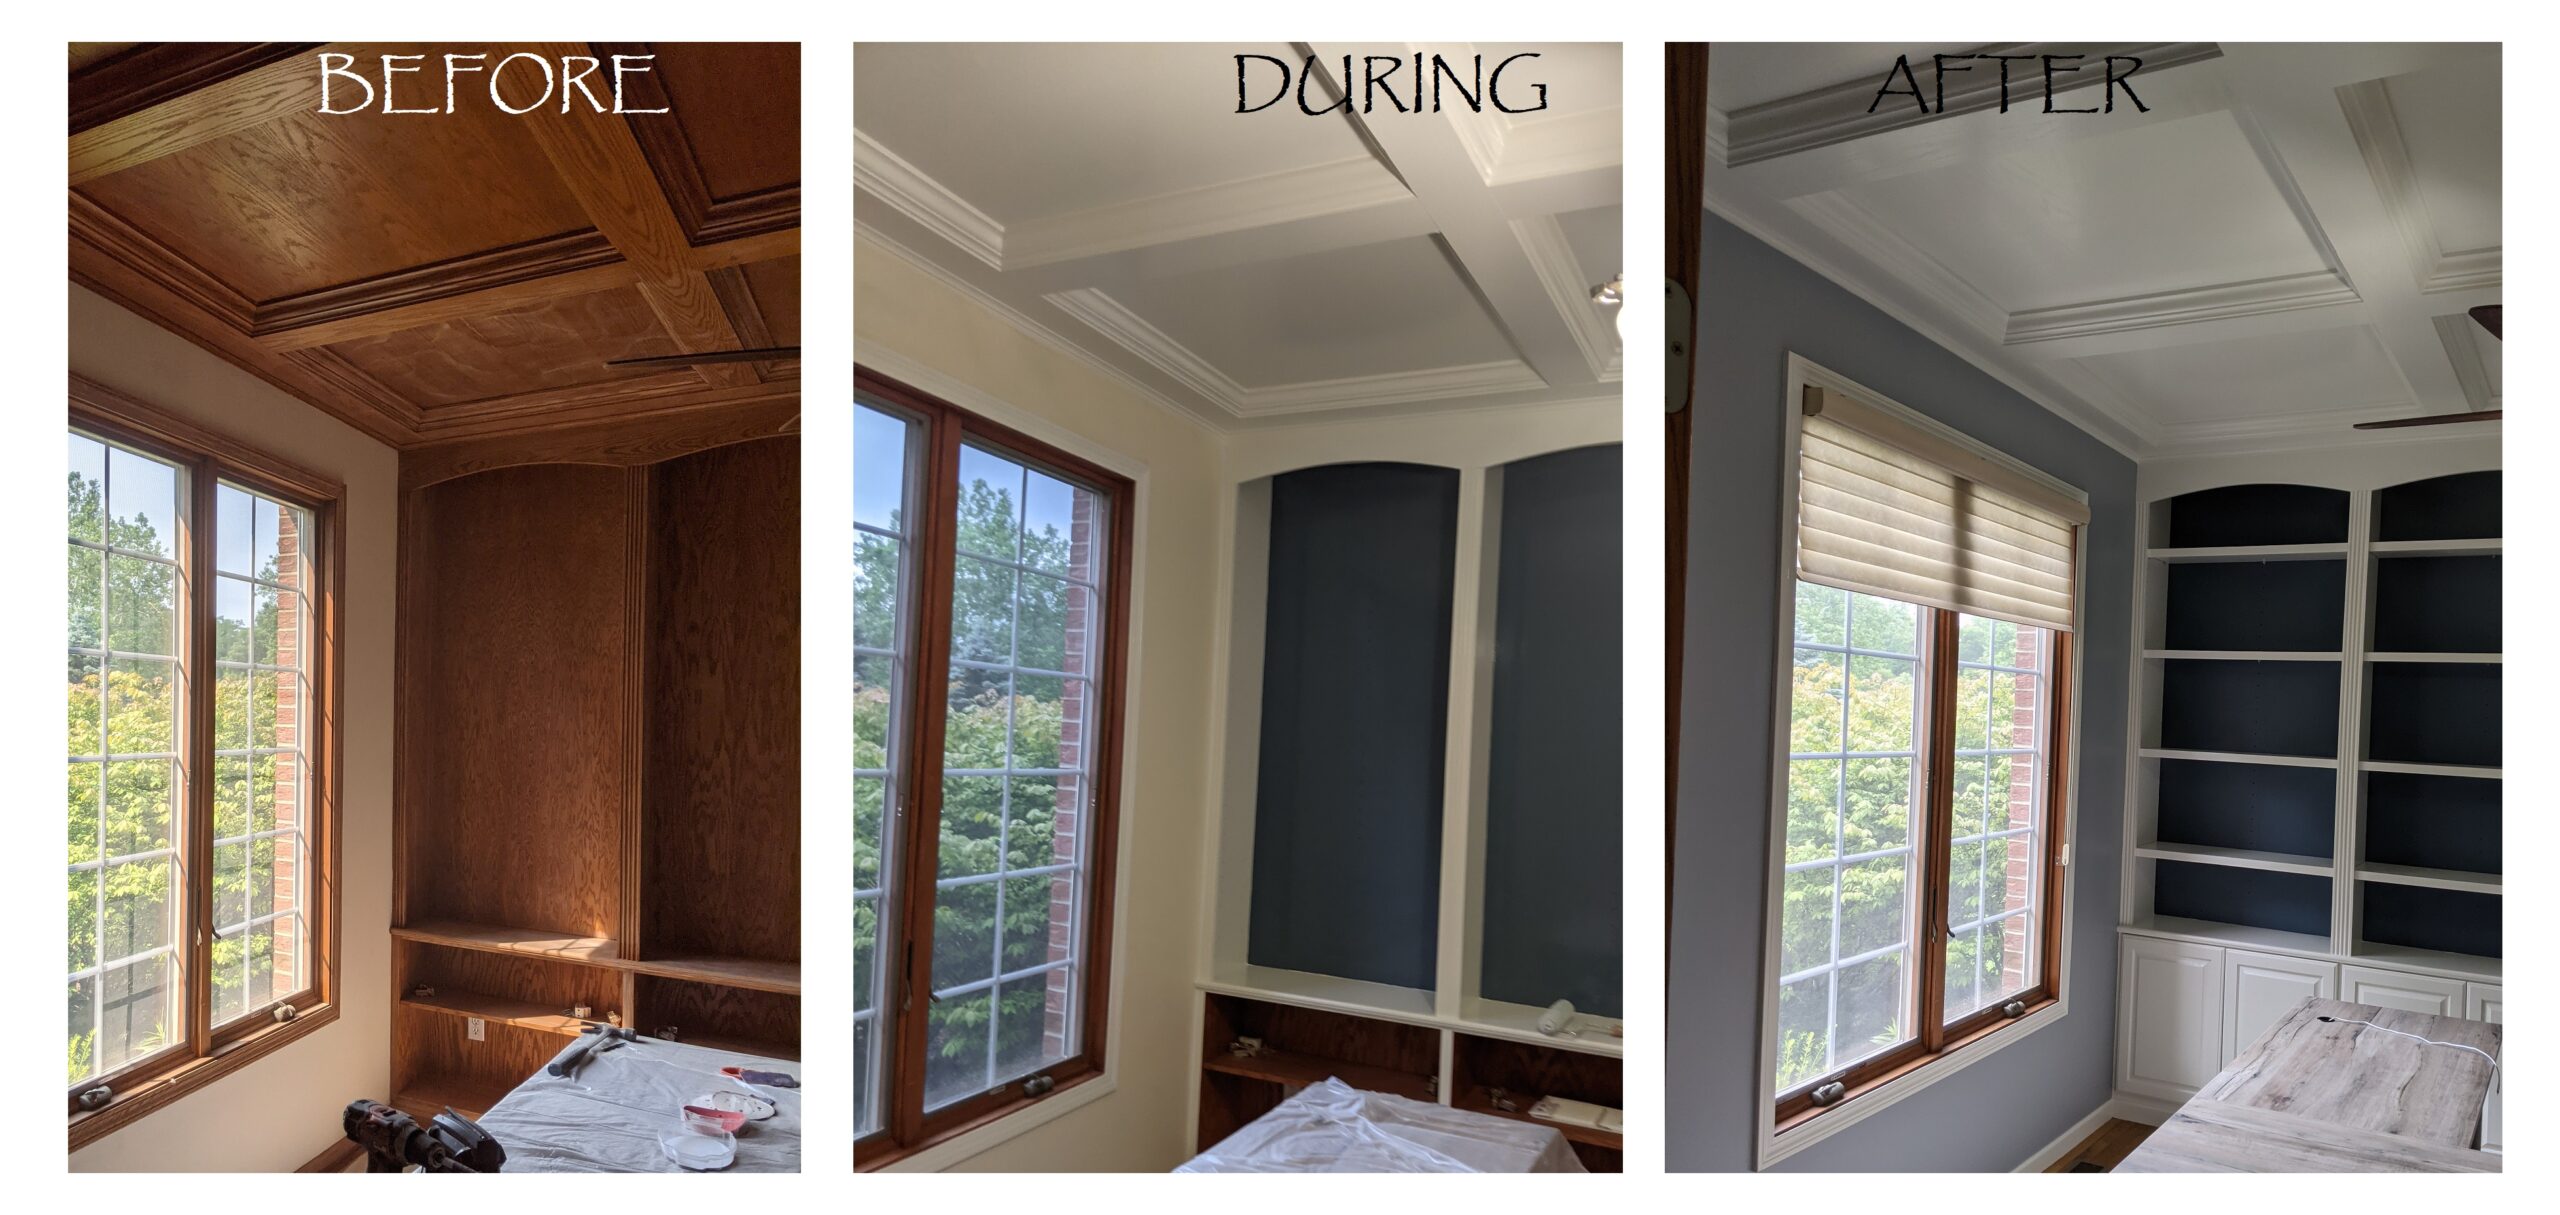 Wood Coffered Ceiling Painted White